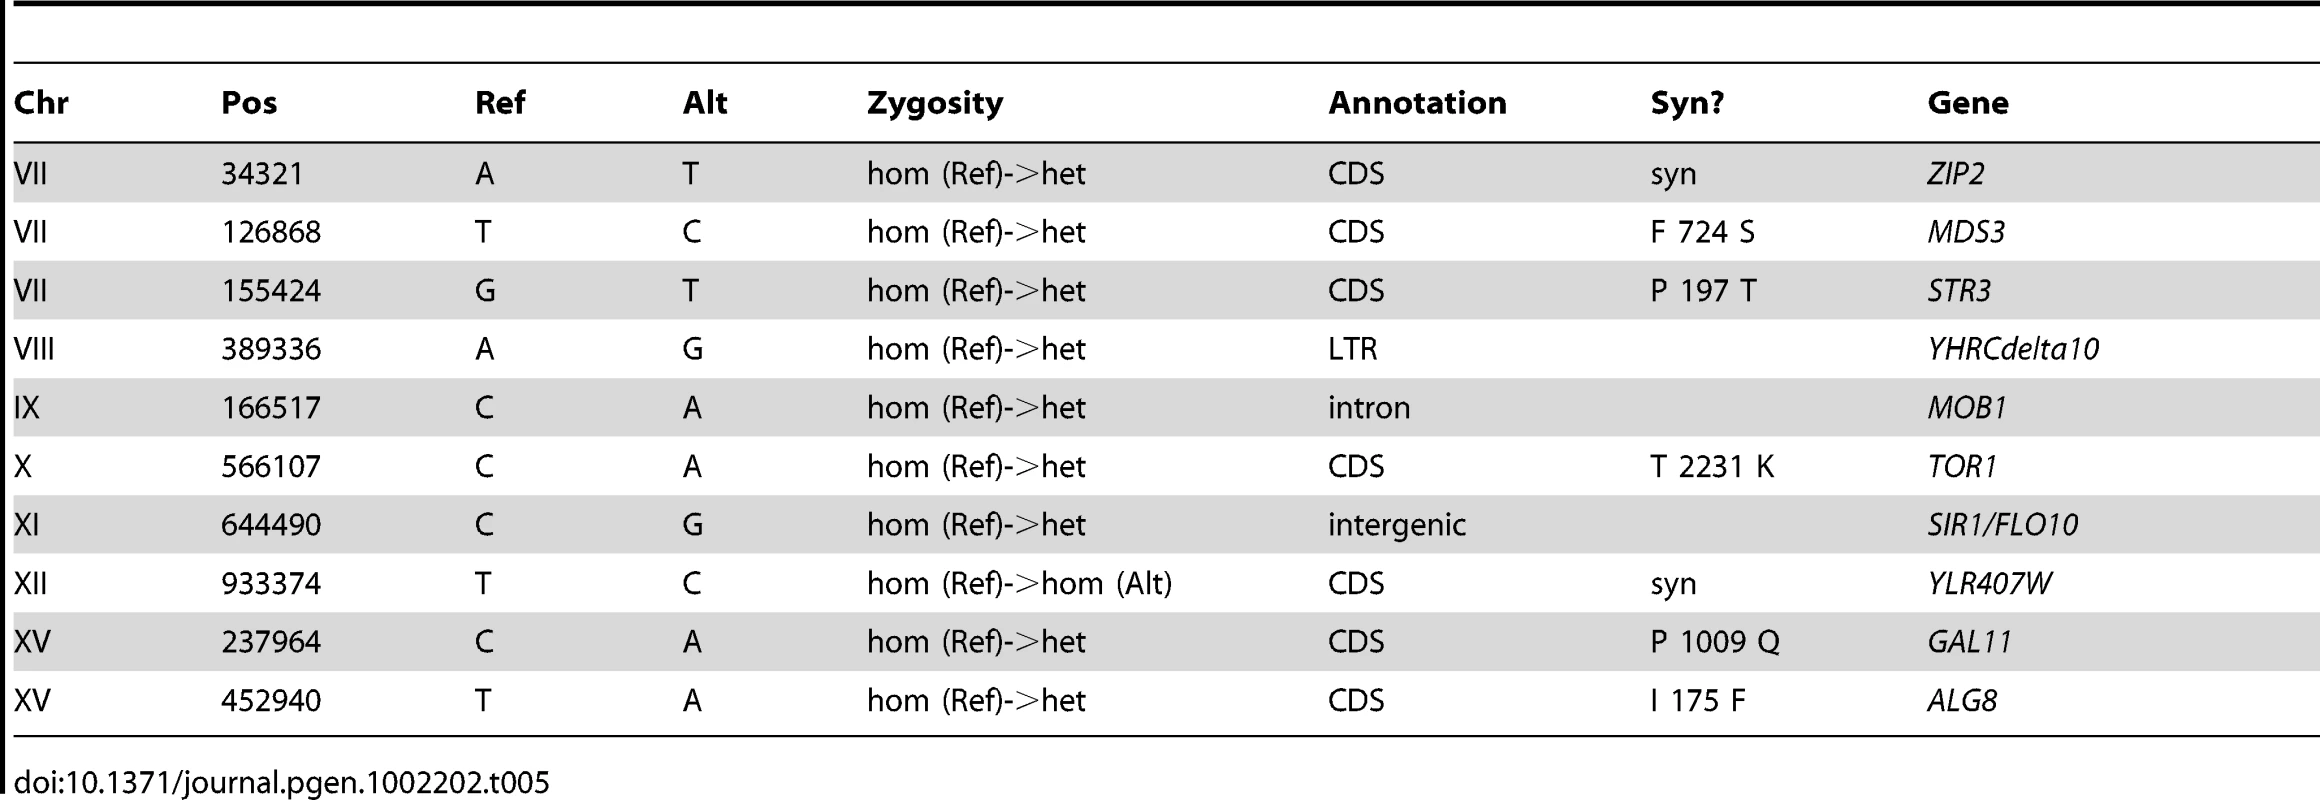 Summary of Substitutions and Indels for E5 (264 generations).